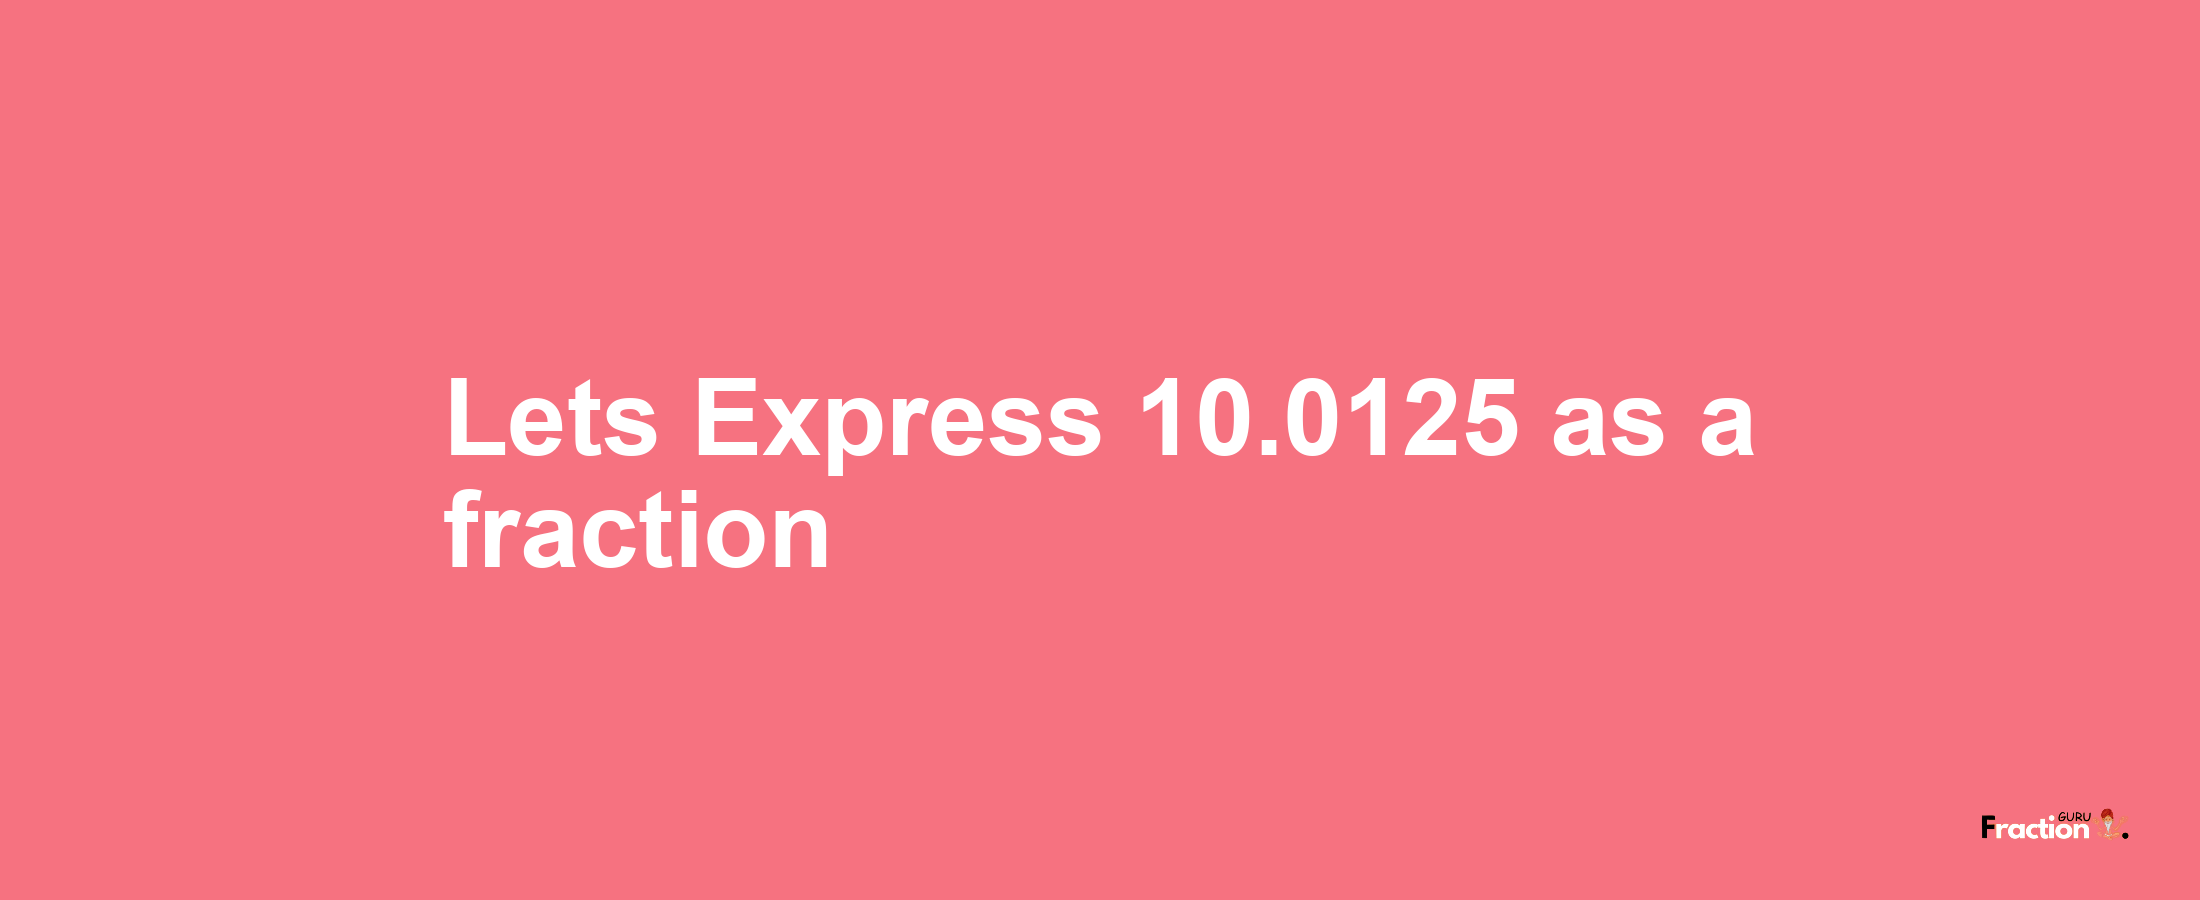 Lets Express 10.0125 as afraction